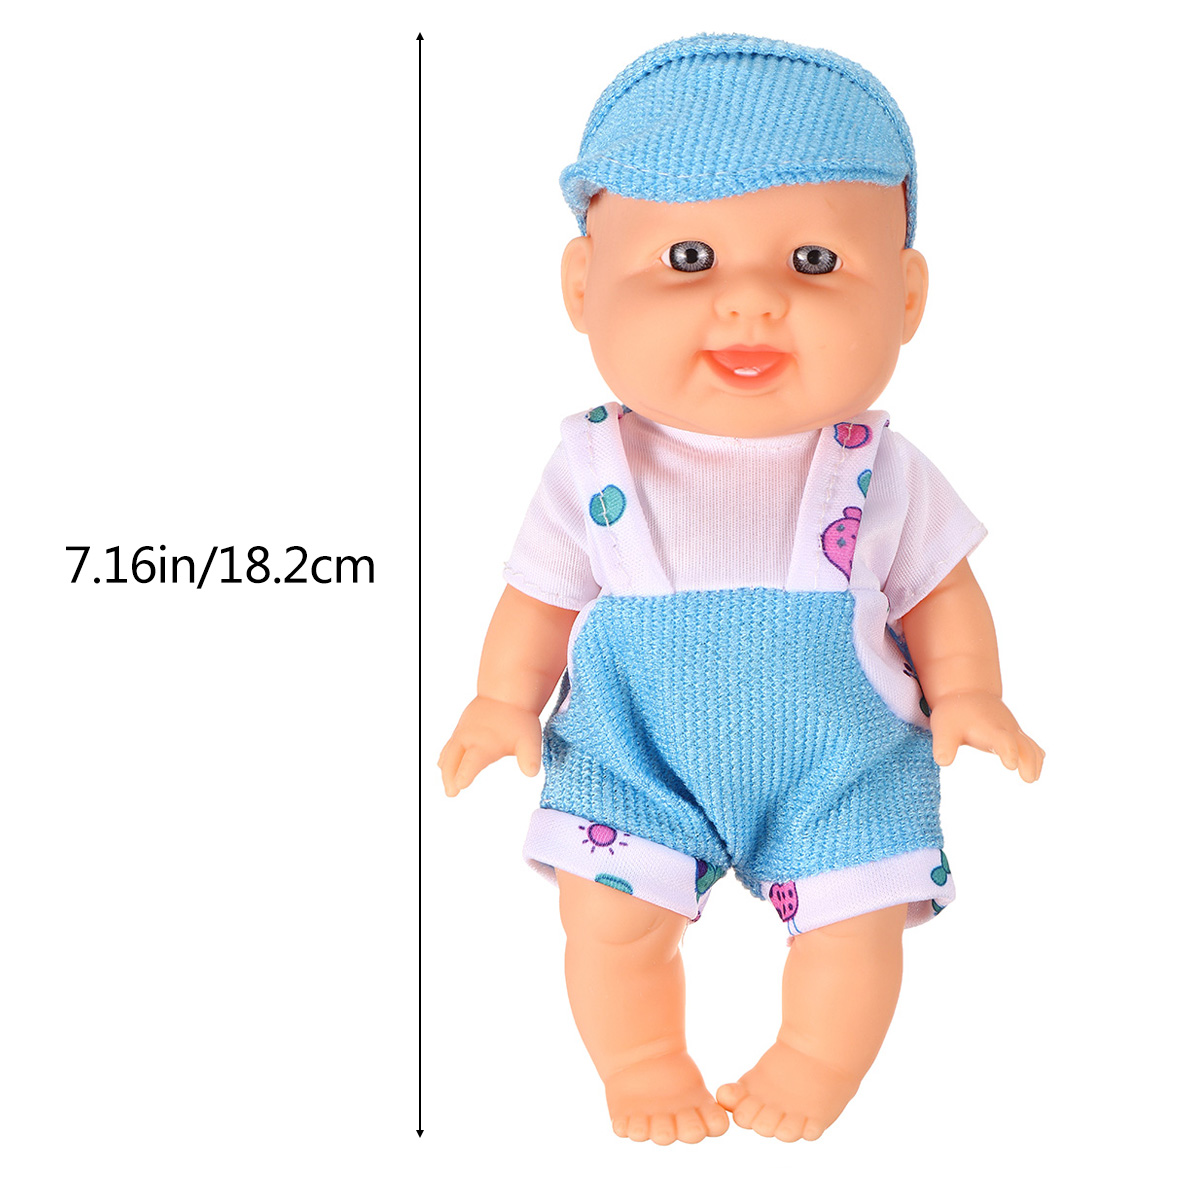 Simulation-Baby-3D-Creative-Cute-Doll-Play-House-Toy-Doll-Vinyl-Doll-Gift-1818656-23